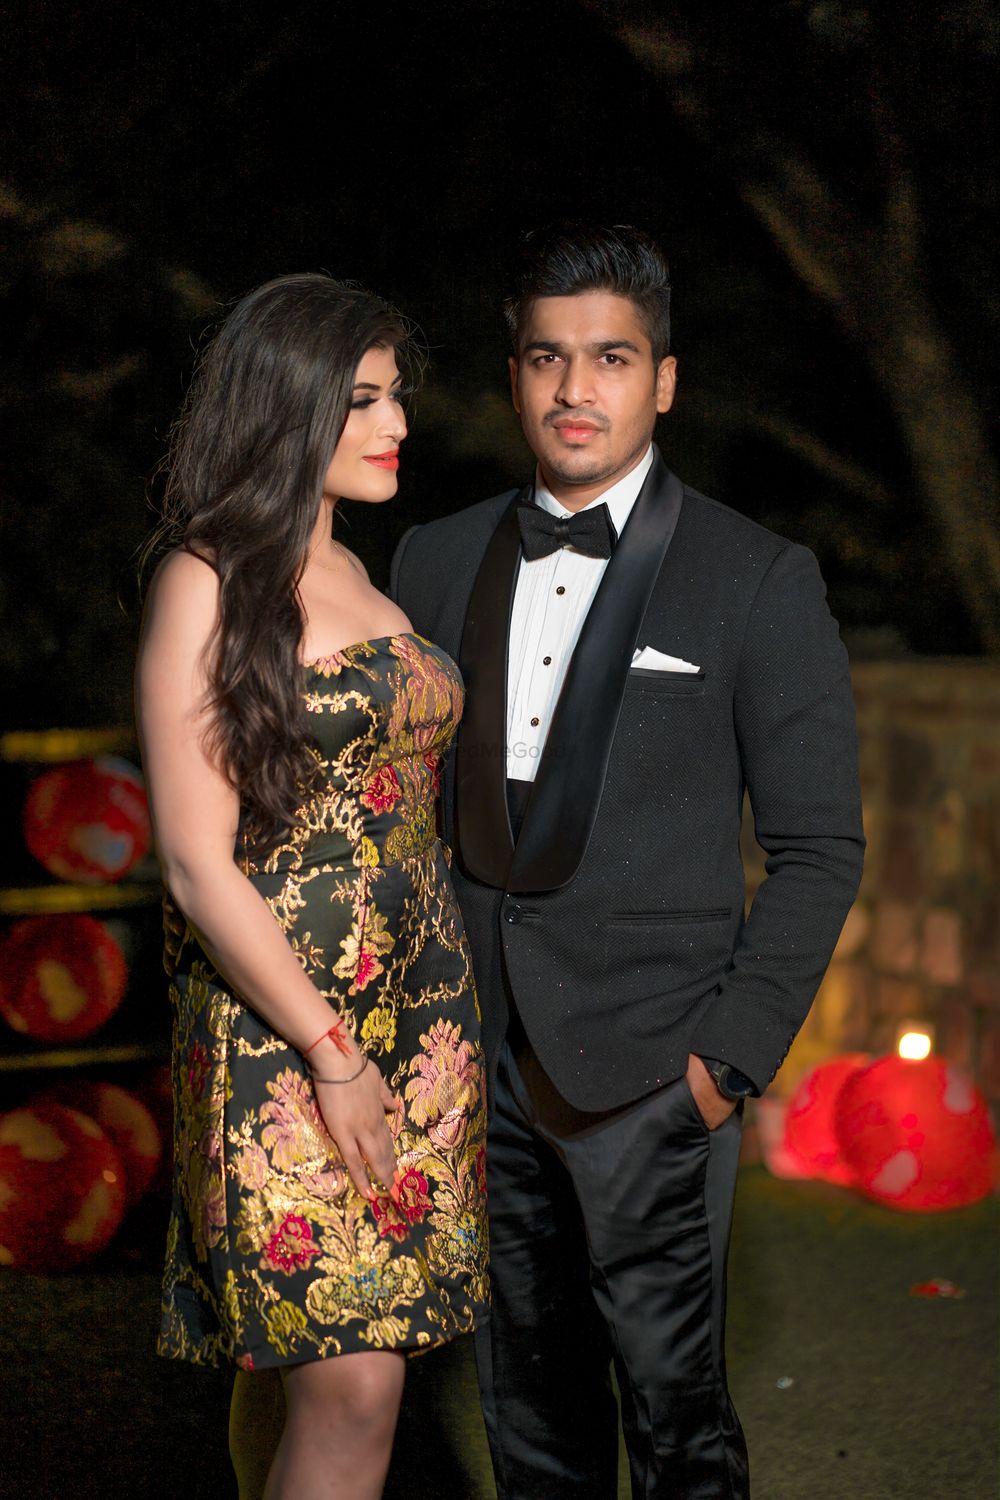 Photo From Harkirat x Mohit - By Affinity Weddings